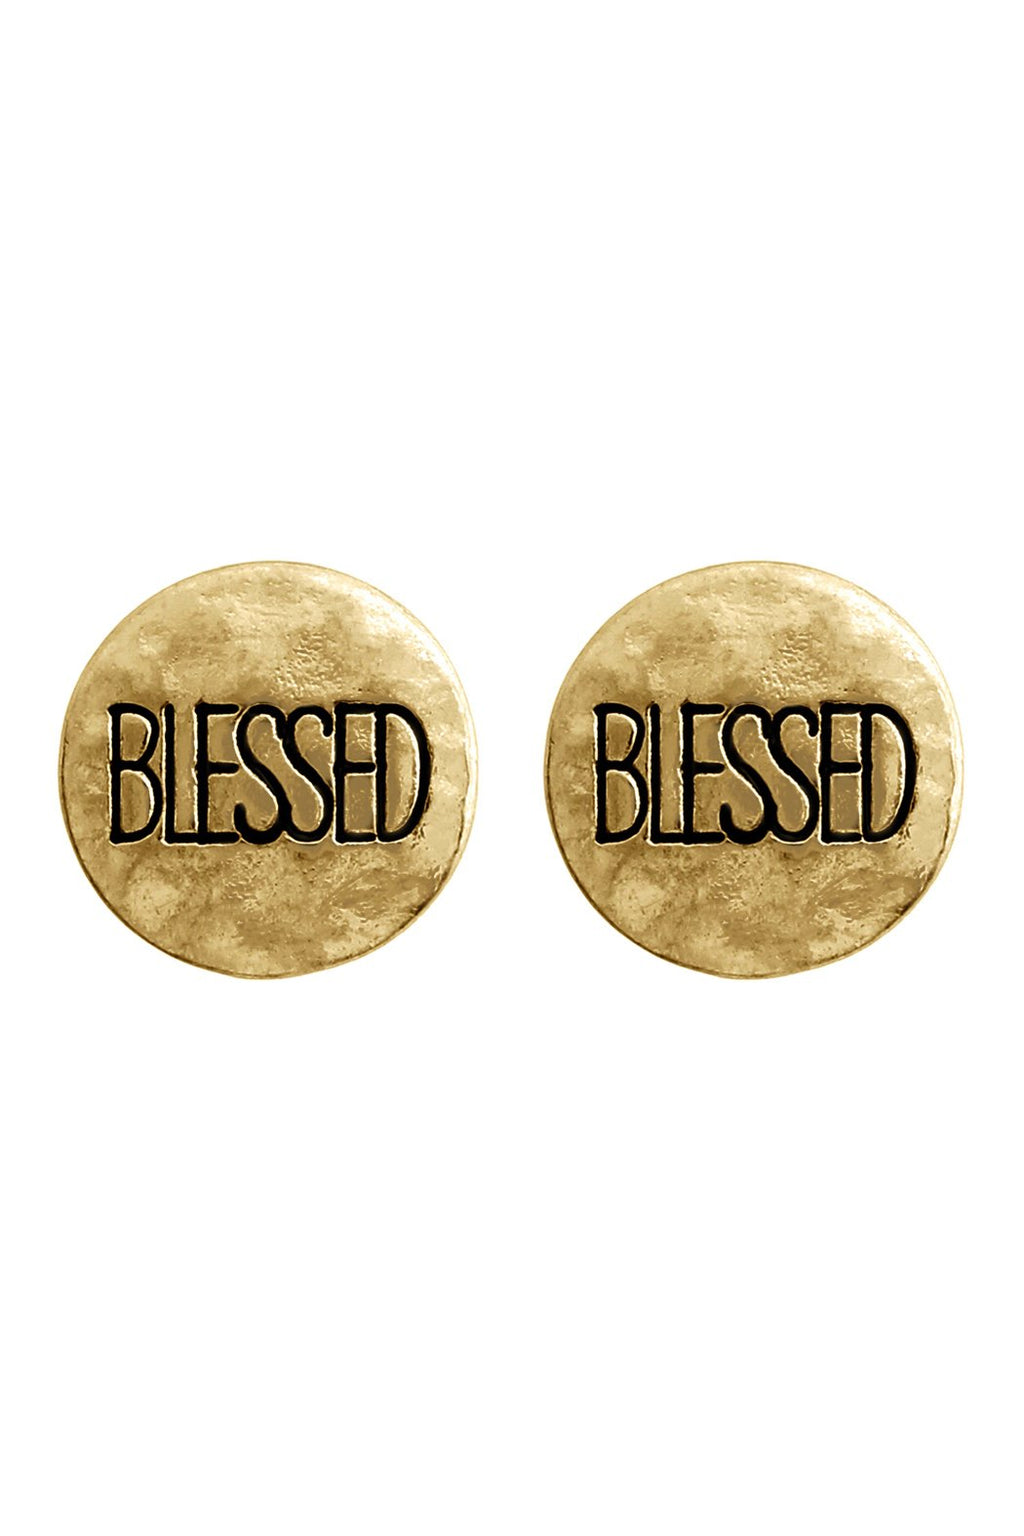 24620 - "Blessed" Engraved Message Earrings